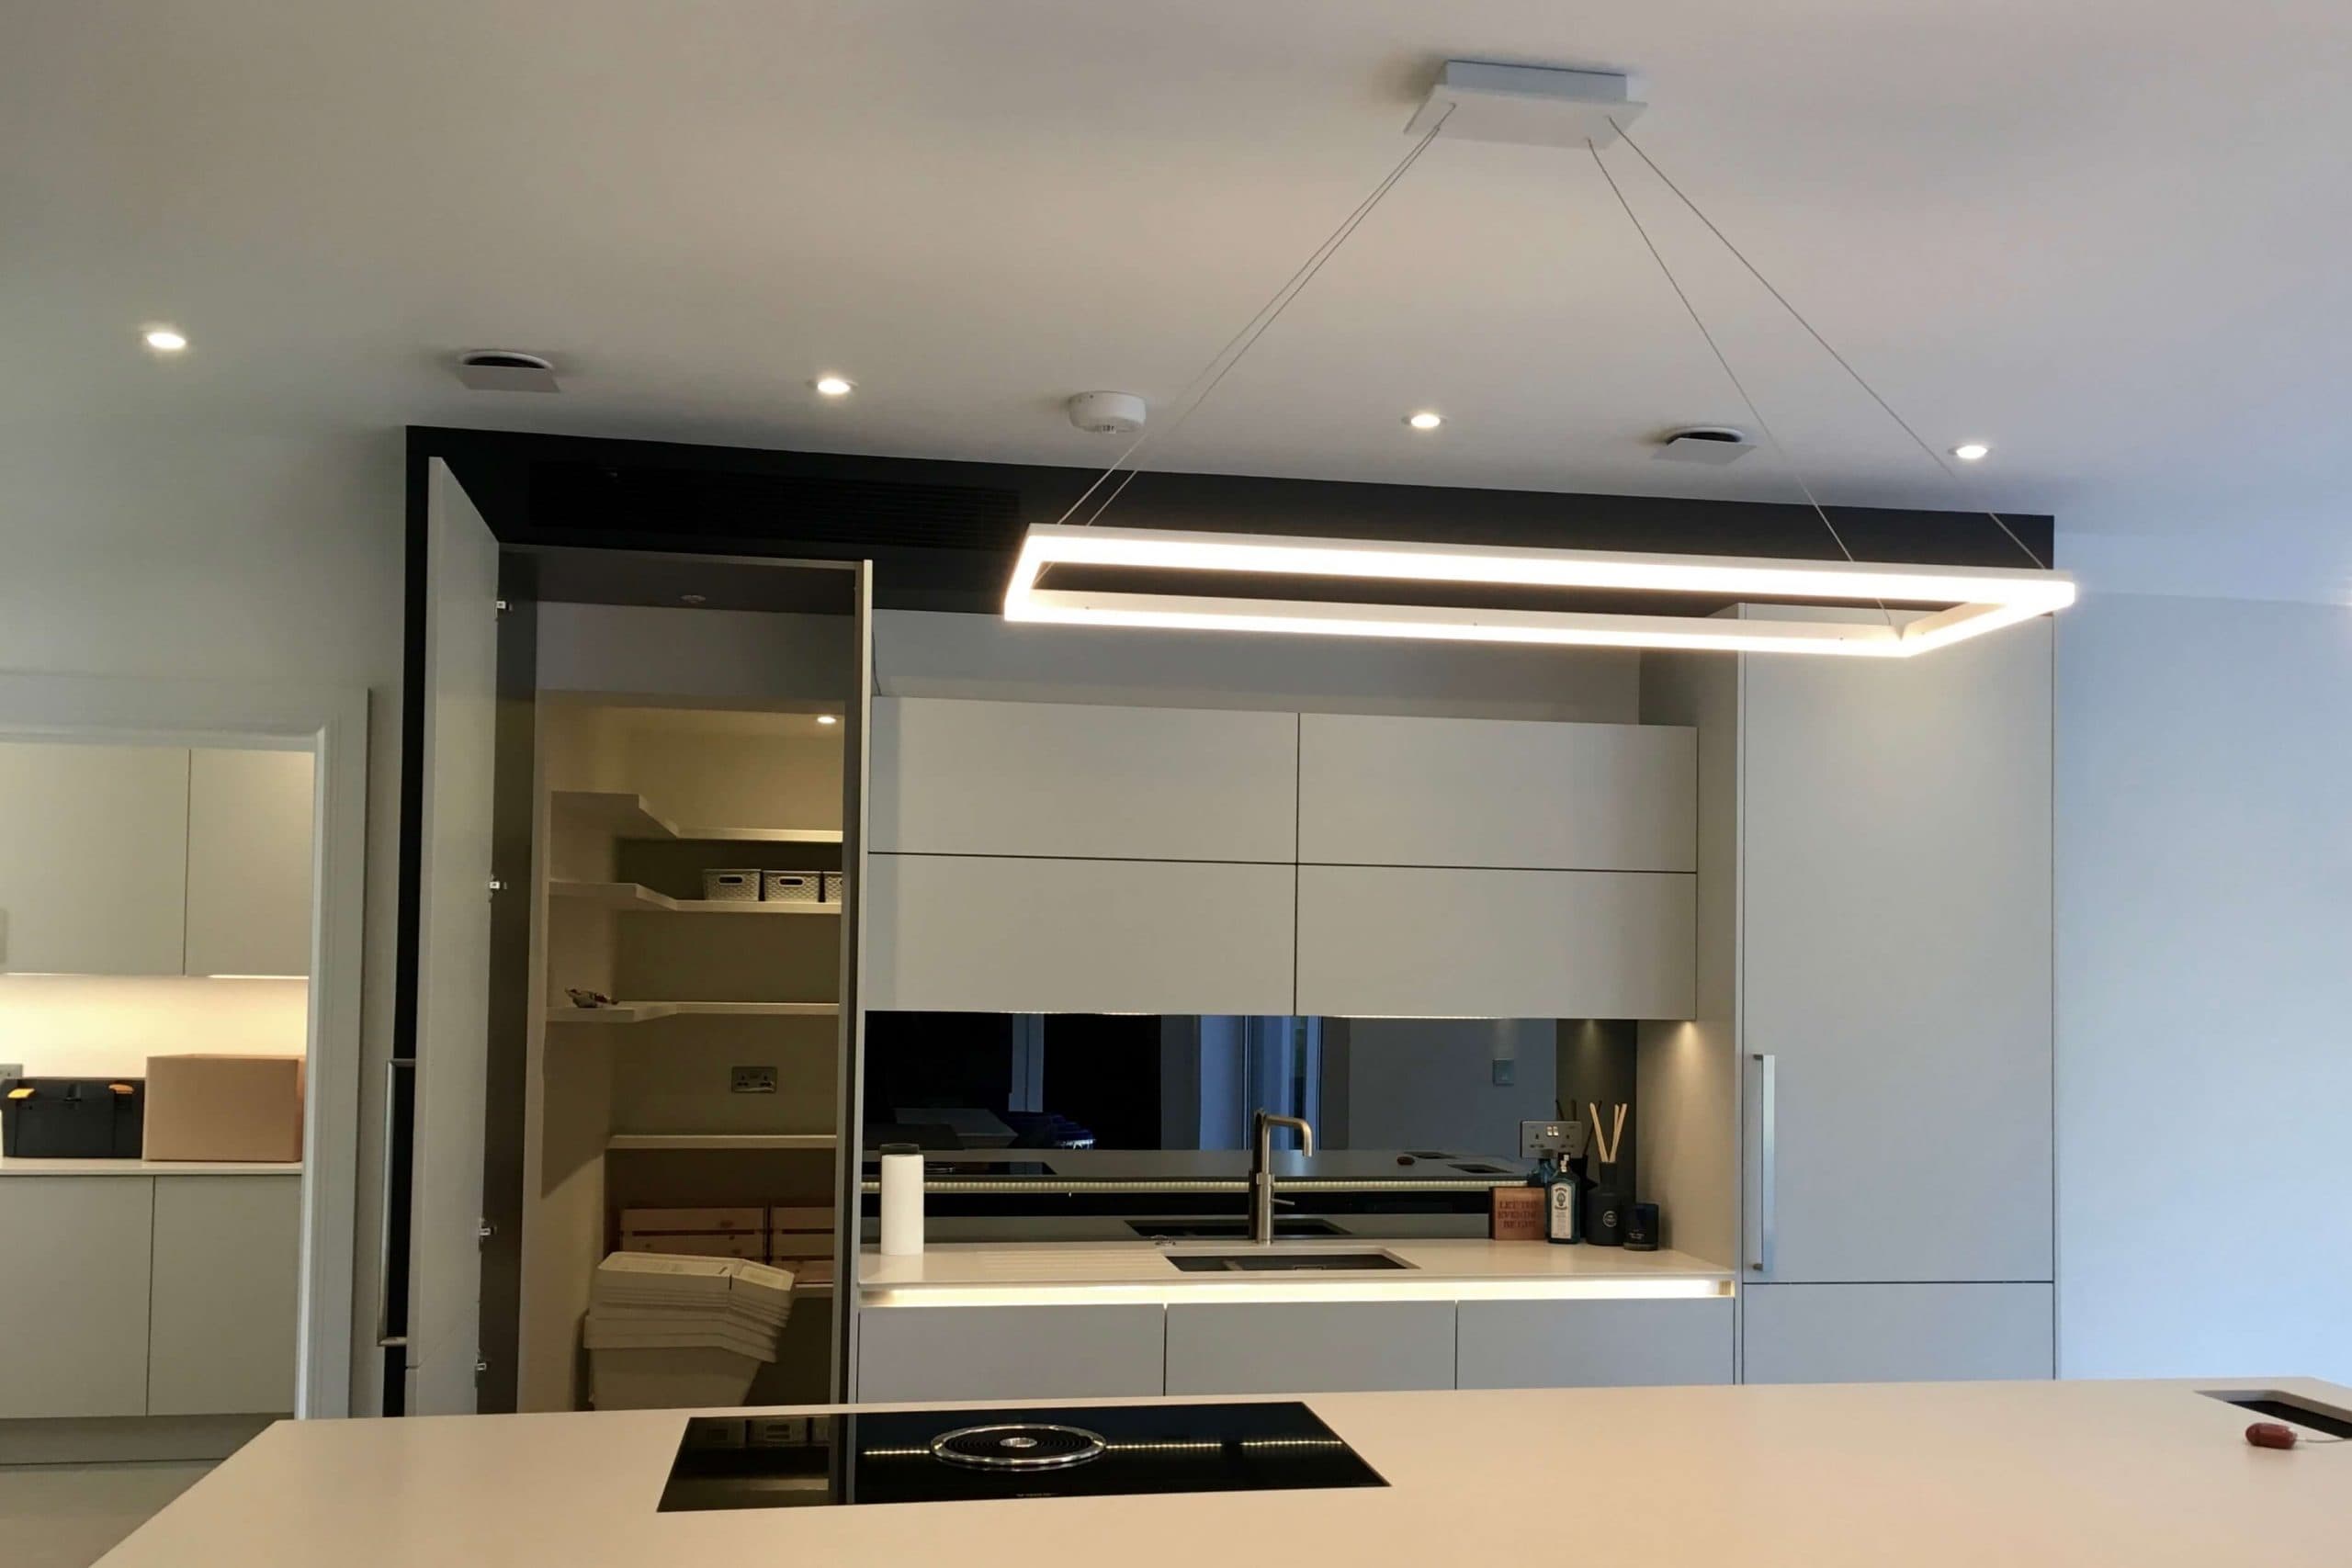 Scandia Hus new build kitchen with invisible Mitsubishi air con grill and MVHR system by SubCool FM hidden door to chill room open